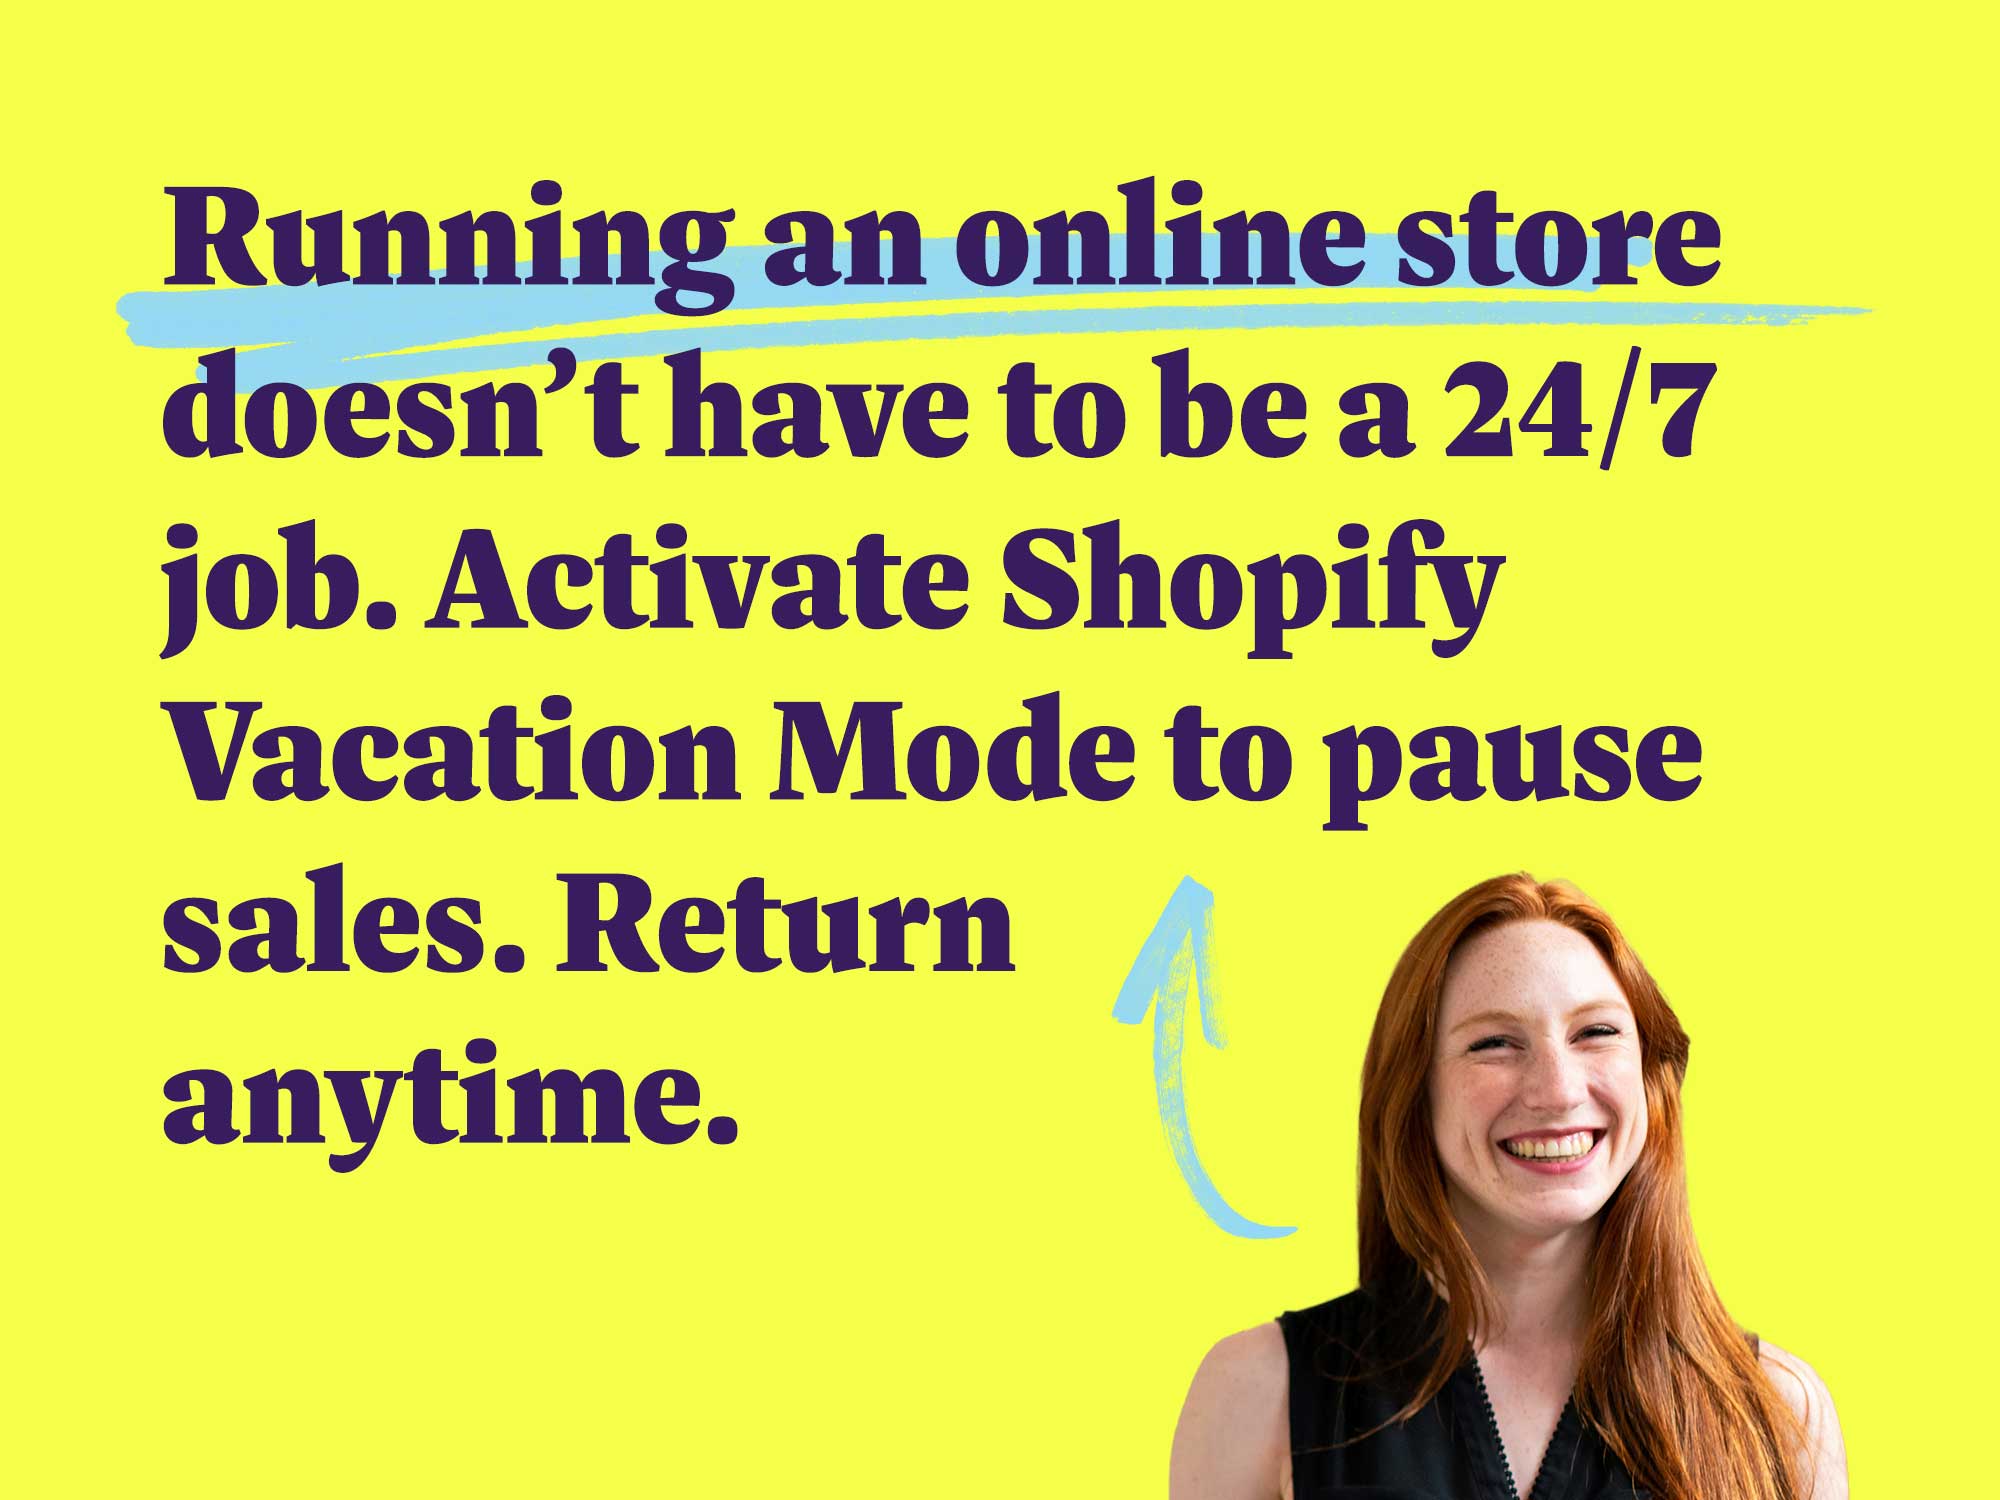 Running an online store doesn’t have to be a 24/7 job. Activate Shopify Vacation Mode to pause sales. Return anytime.